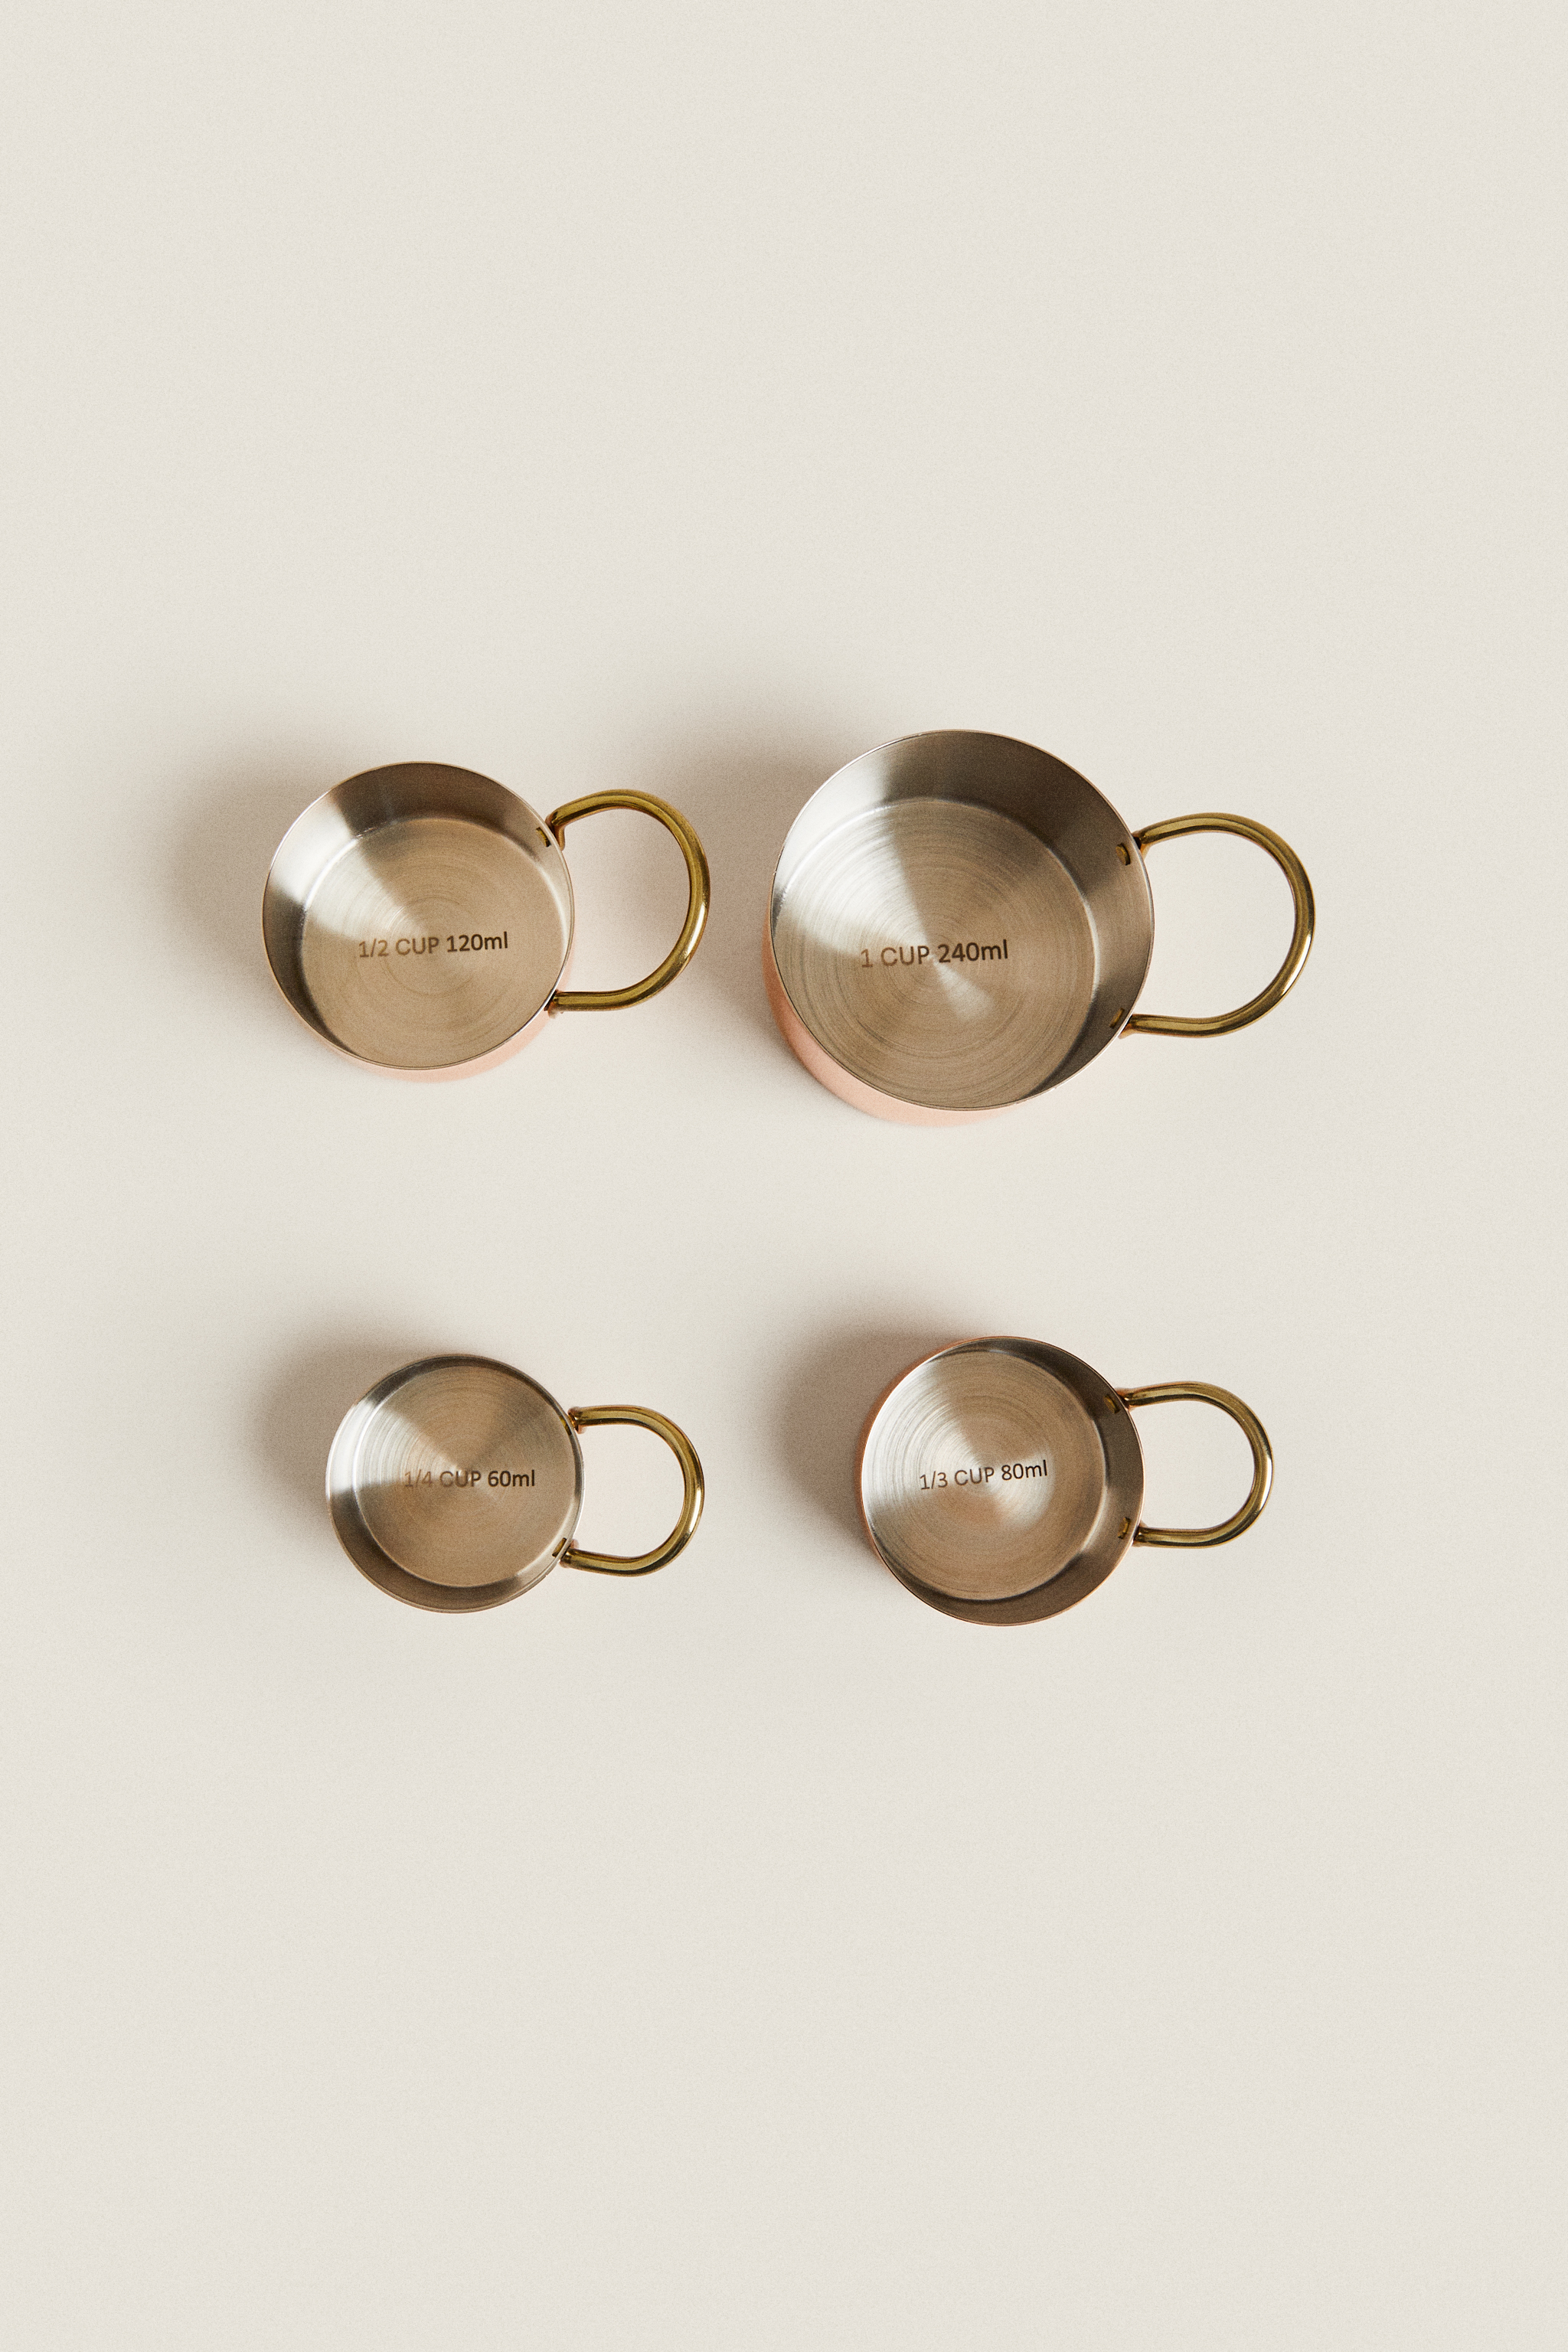 SET OF 4 MEASURING CUPS